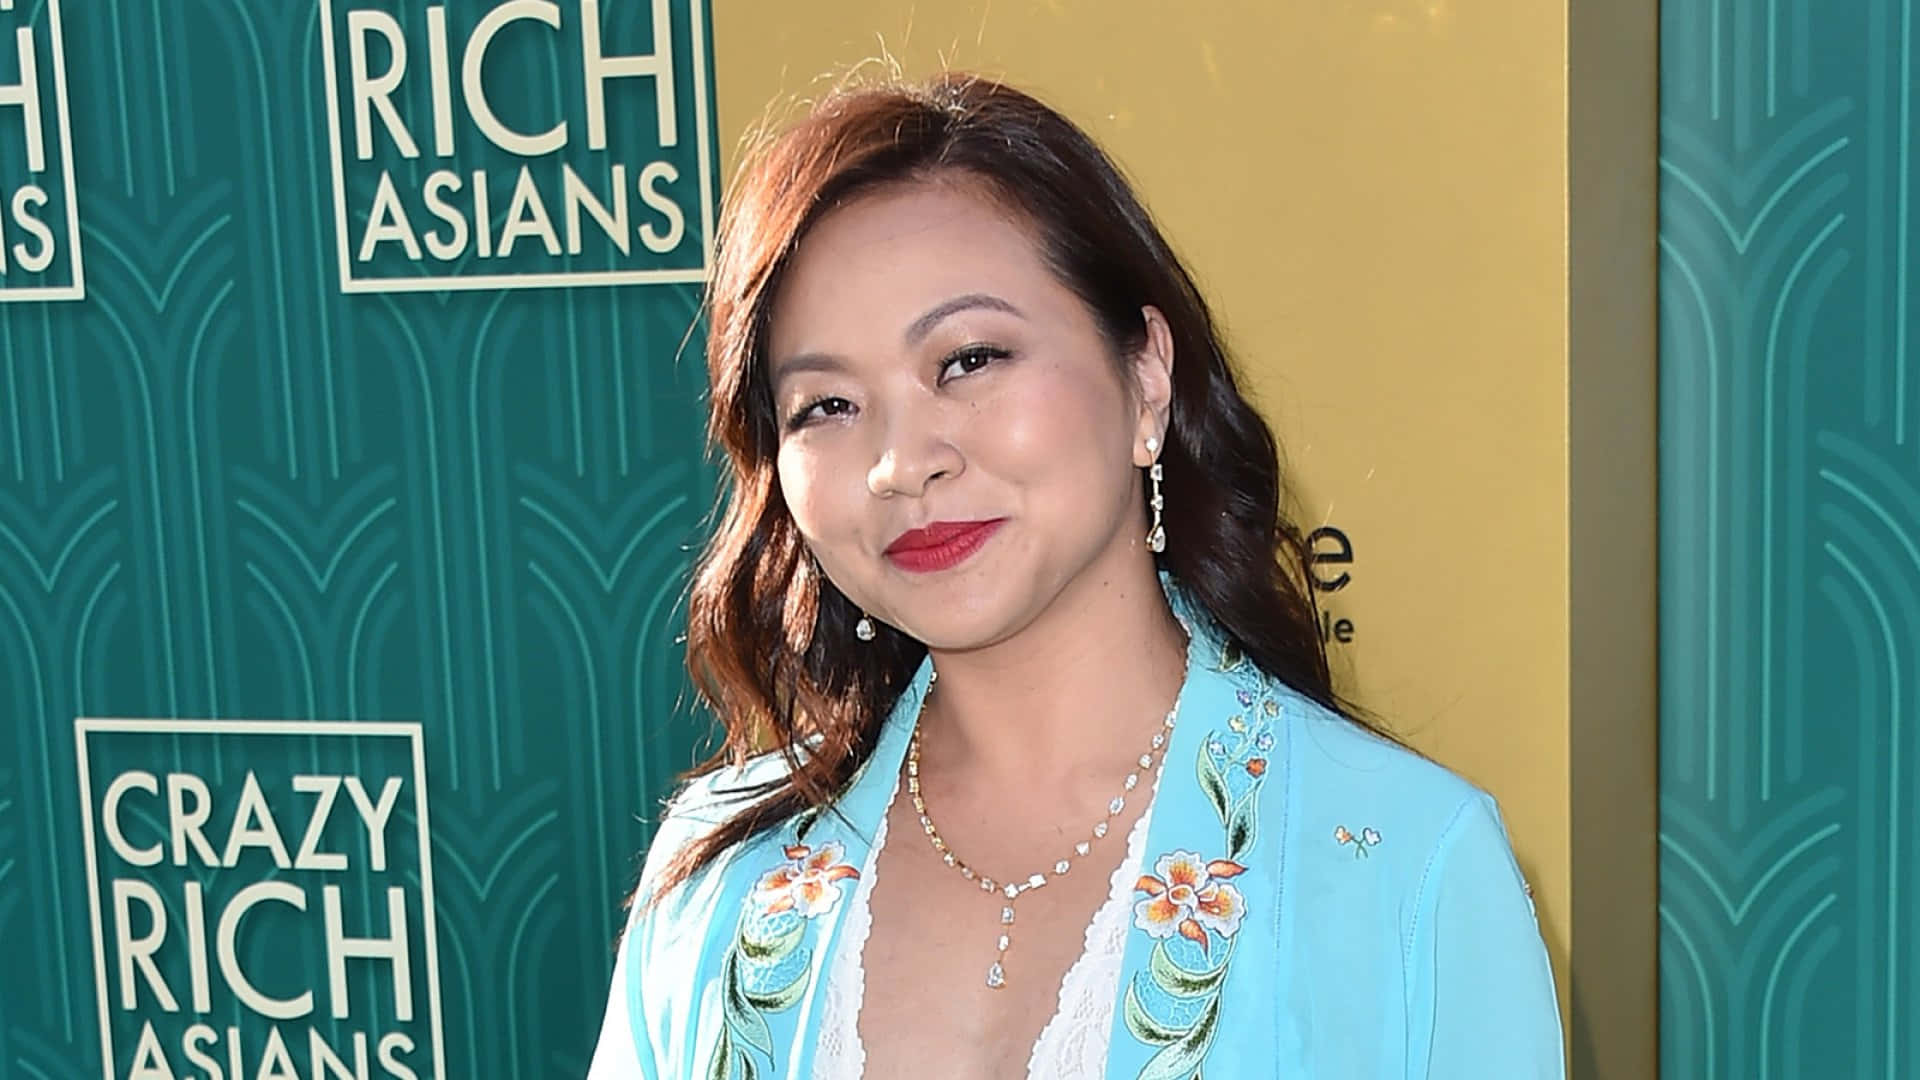 "Crazy Rich Asians: The world of opulence and wealth revealed."